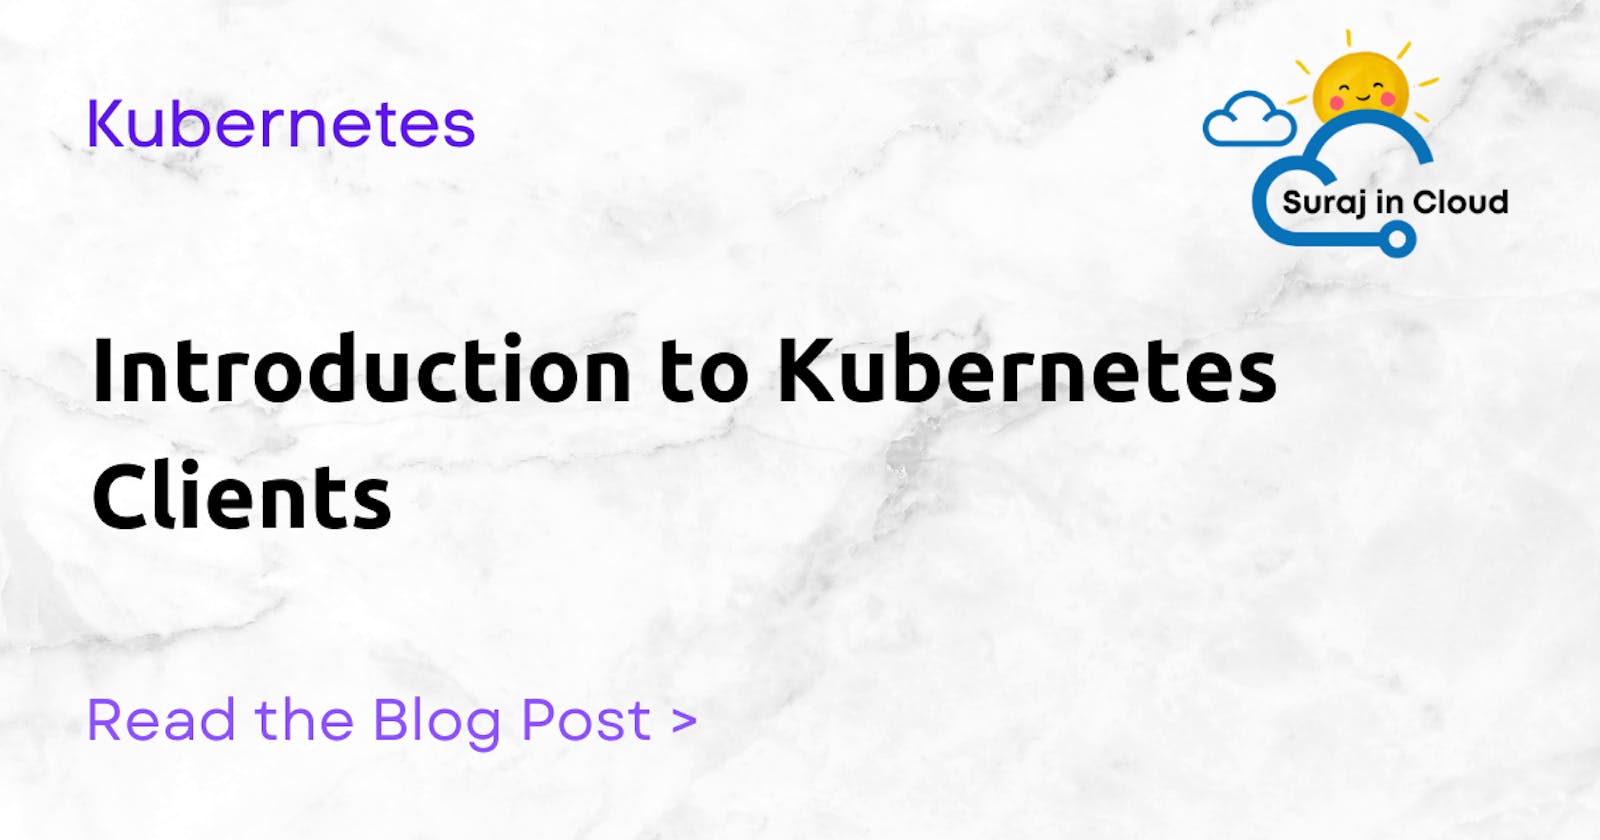 Introduction to Kubernetes Clients